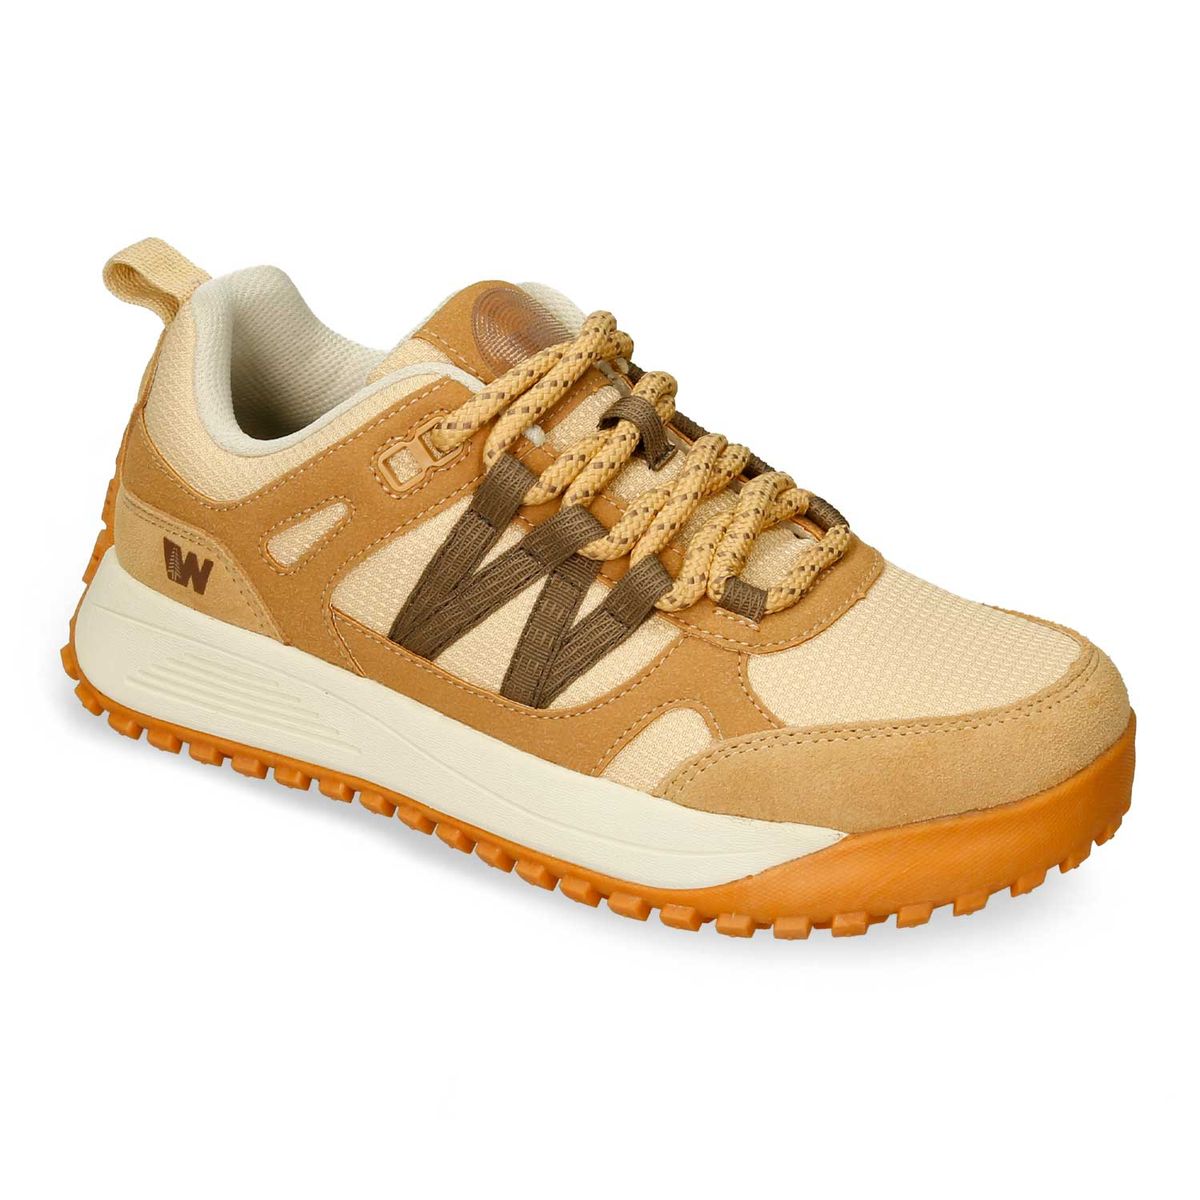 Tenis Outdoor Bronce Weinbrenner Banff Andes Mujer